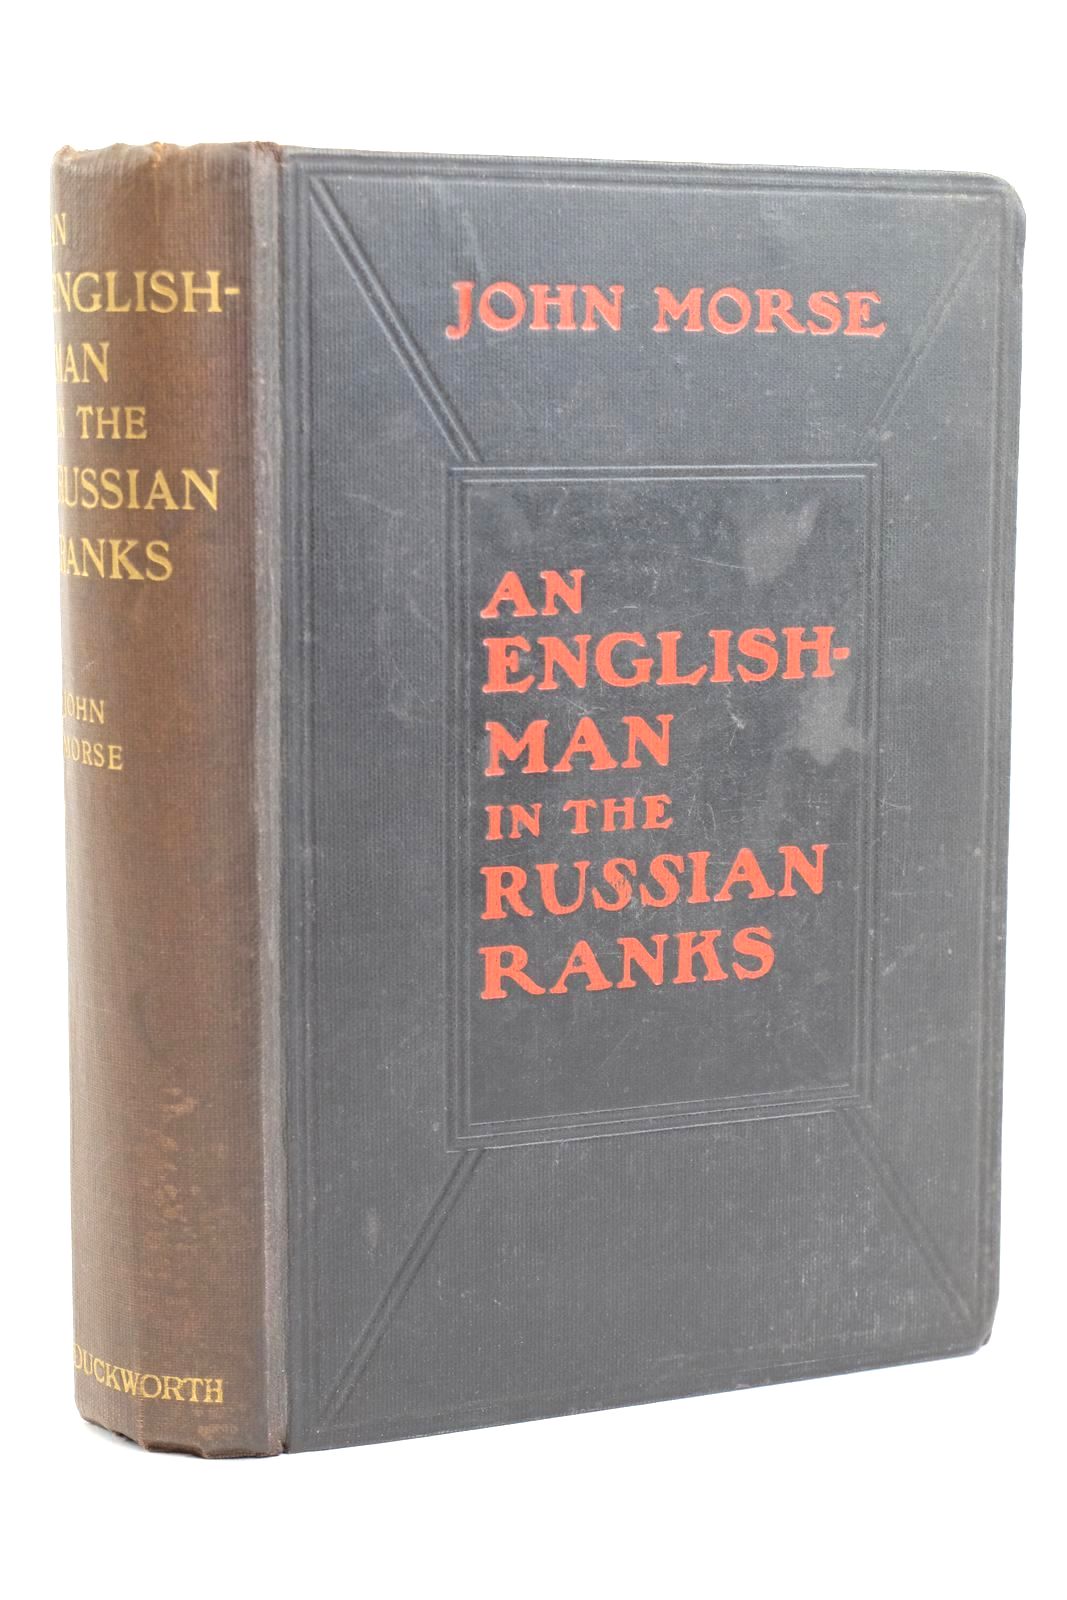 Photo of AN ENGLISHMAN IN THE RUSSIAN RANKS written by Morse, John published by Duckworth &amp; Co. (STOCK CODE: 1320175)  for sale by Stella & Rose's Books